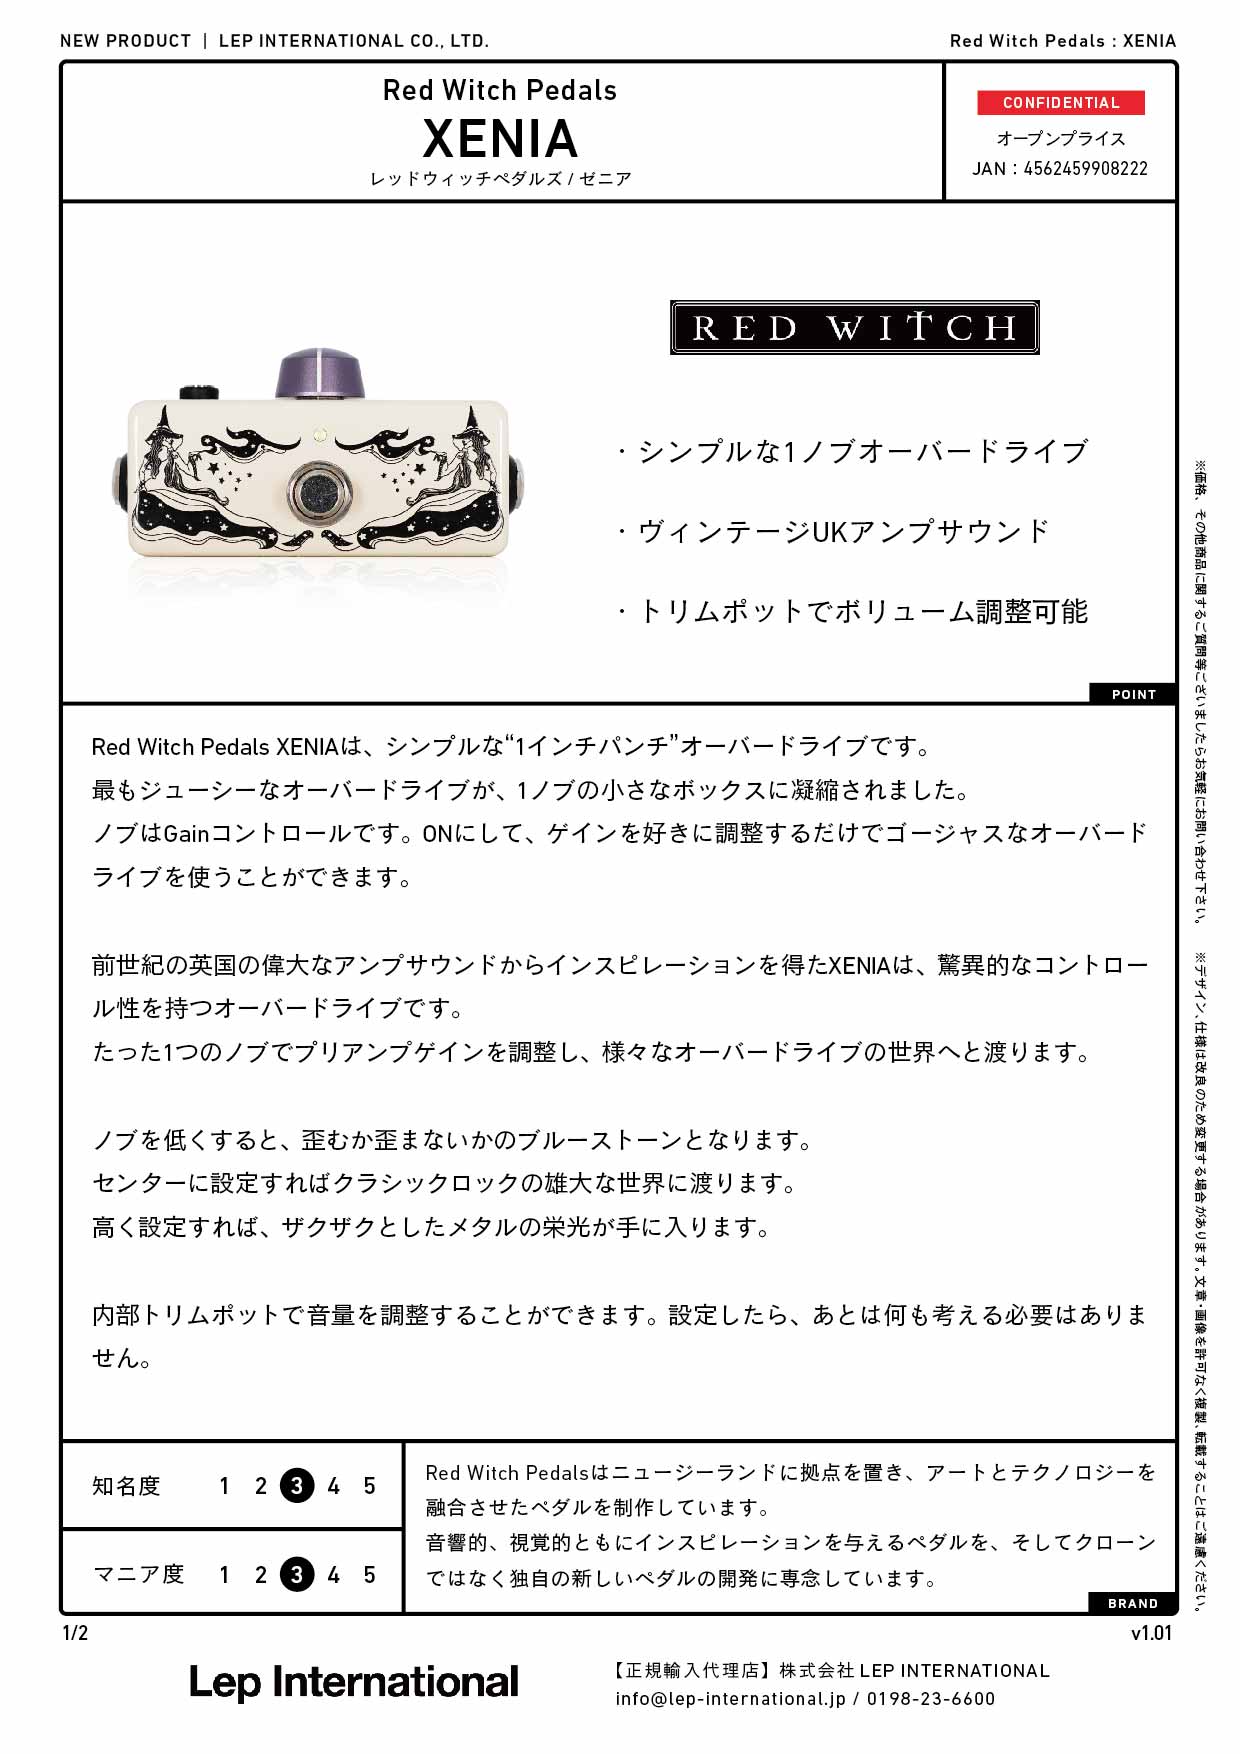 Red Witch Pedals / XENIA